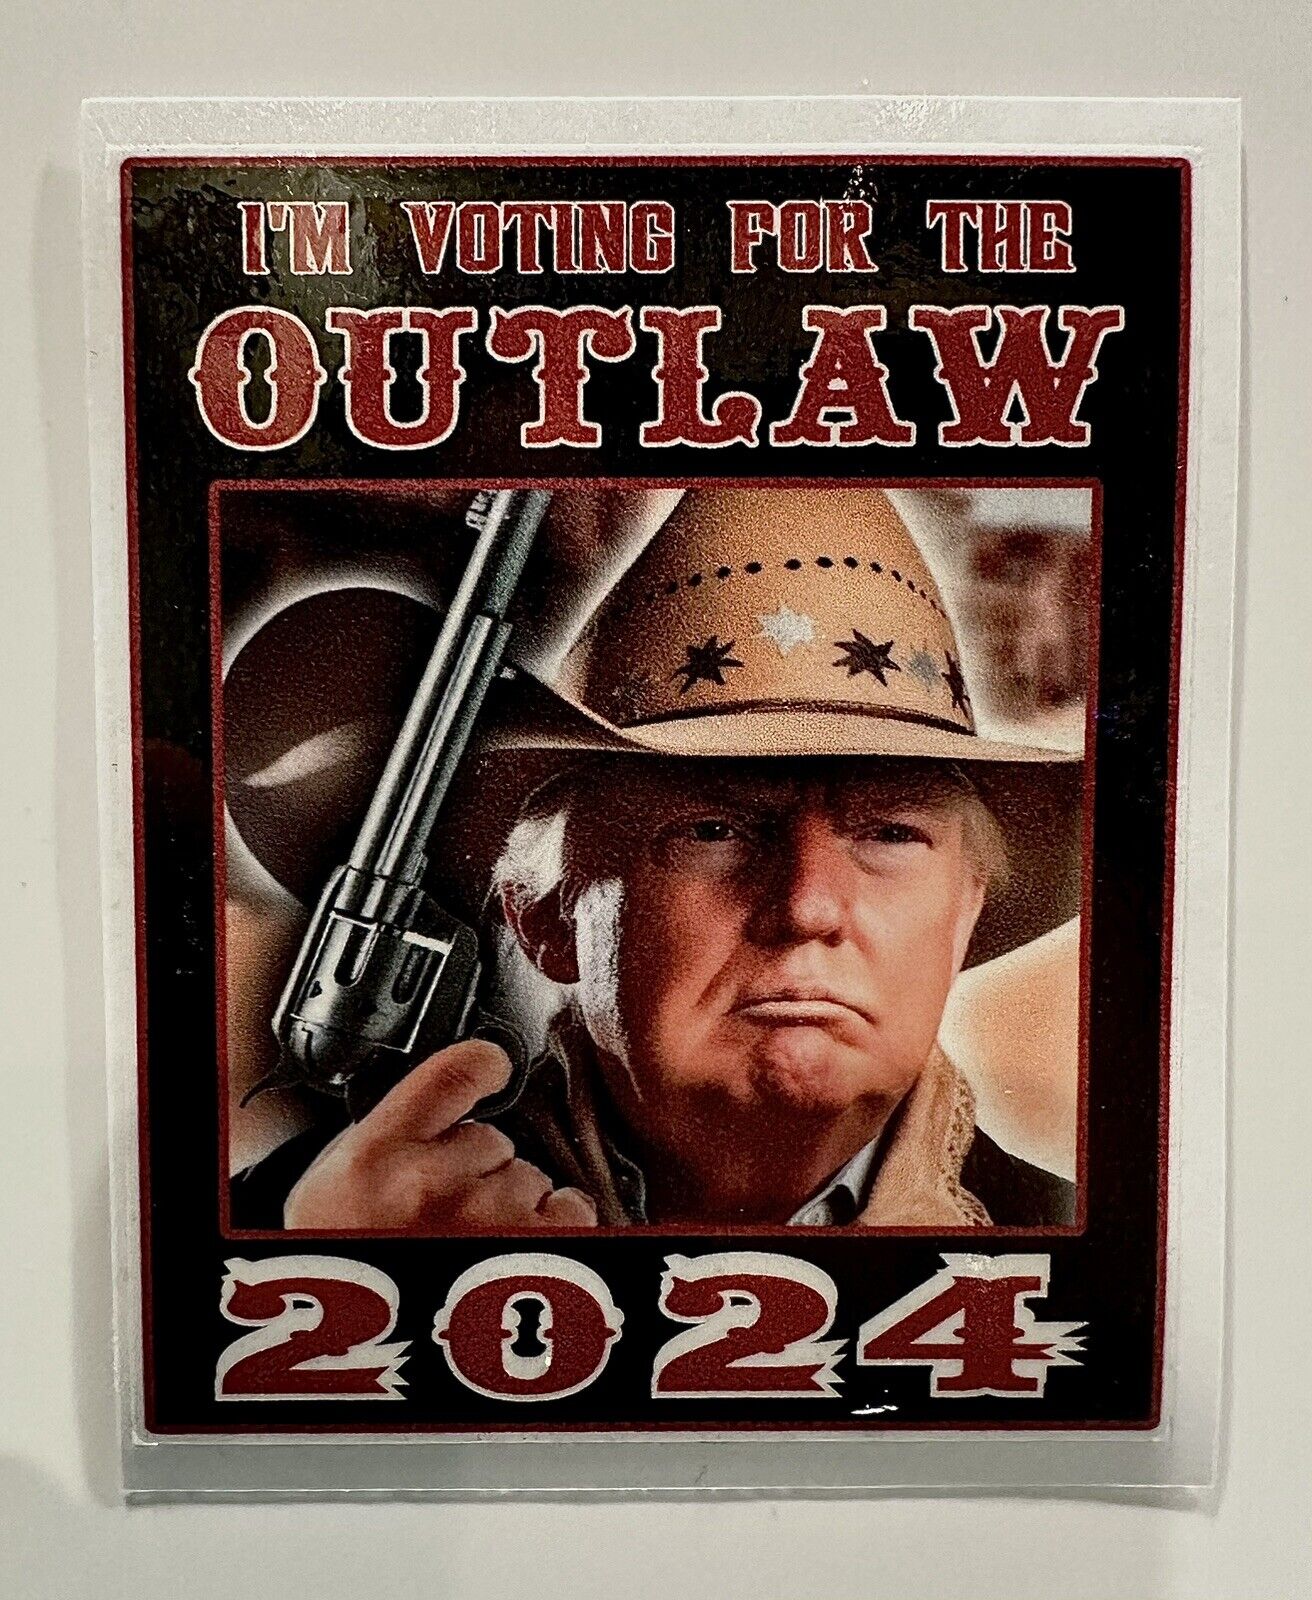 I’M VOTING FOR THE OUTLAW - FULL COLOR DECAL -SHIPPING INCLUDED